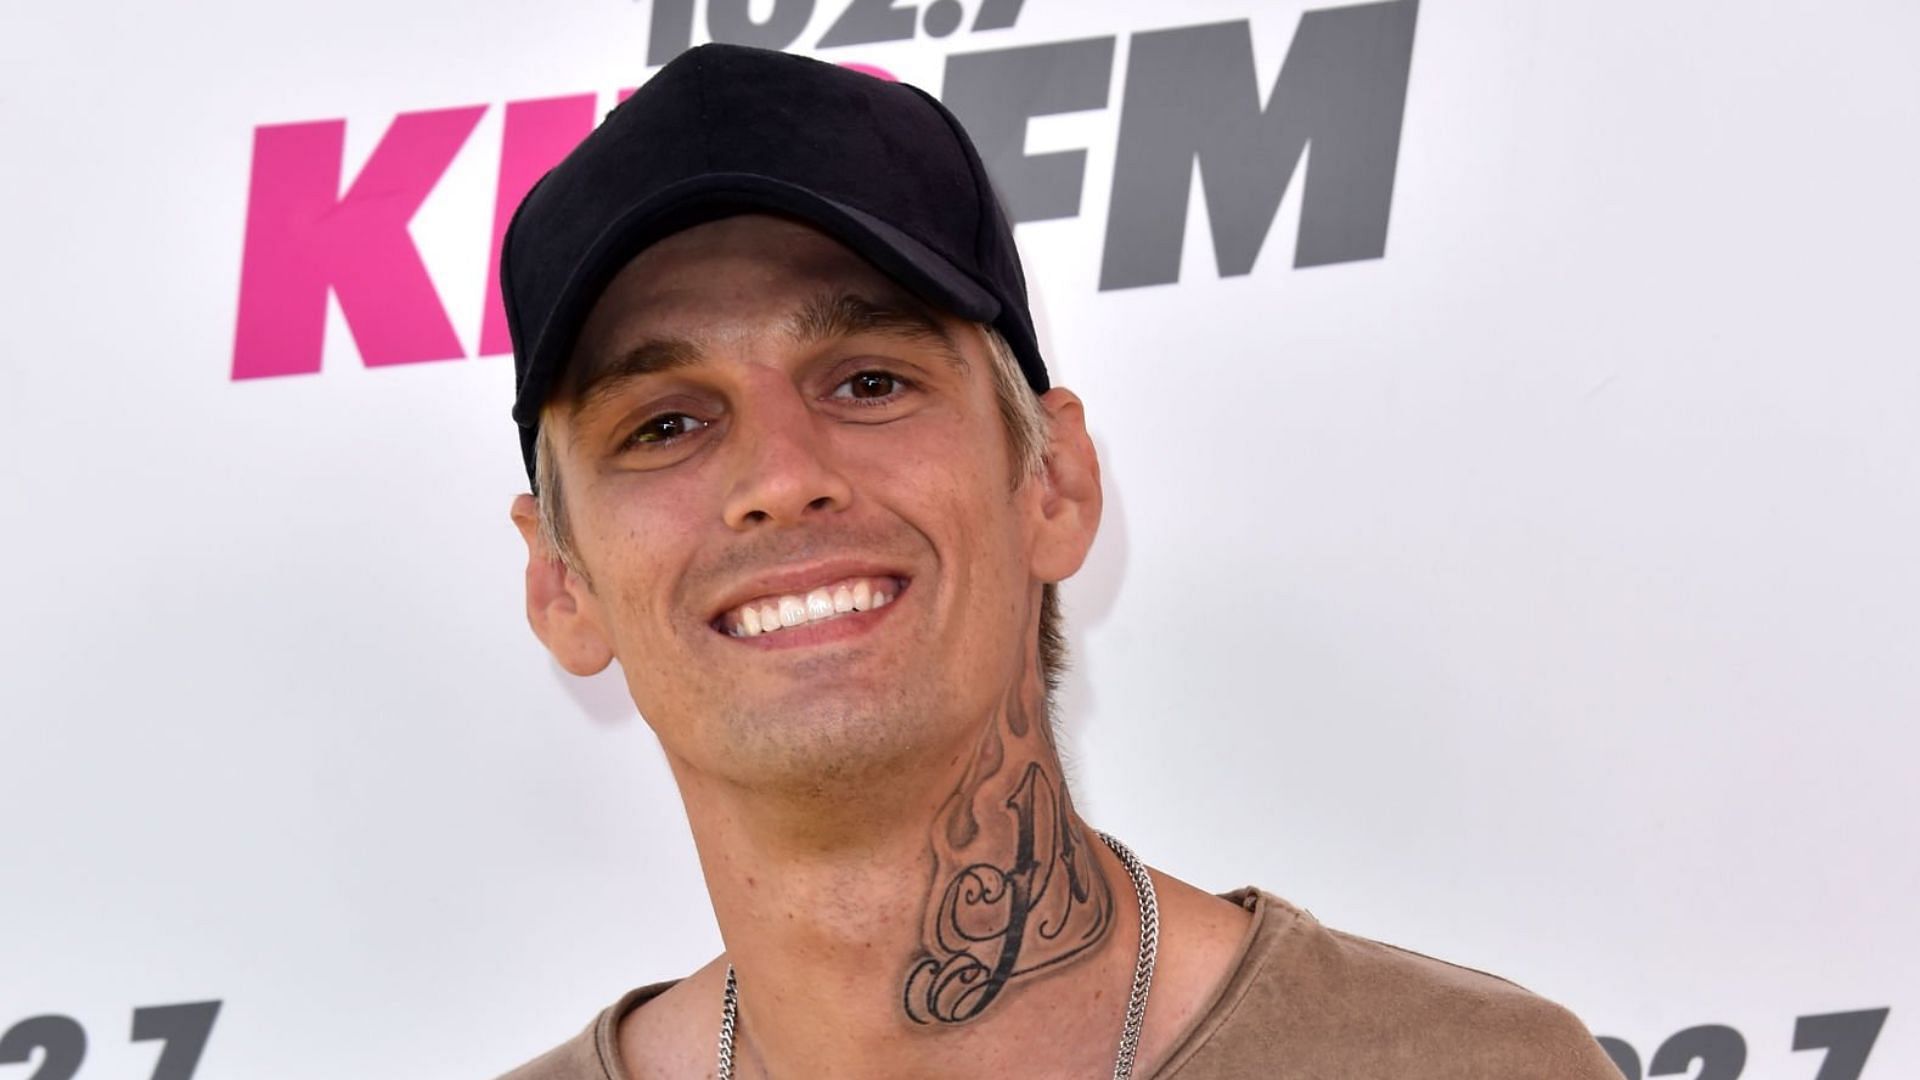 Aaron Carter (Photo by Frazer Harrison/Getty Images)